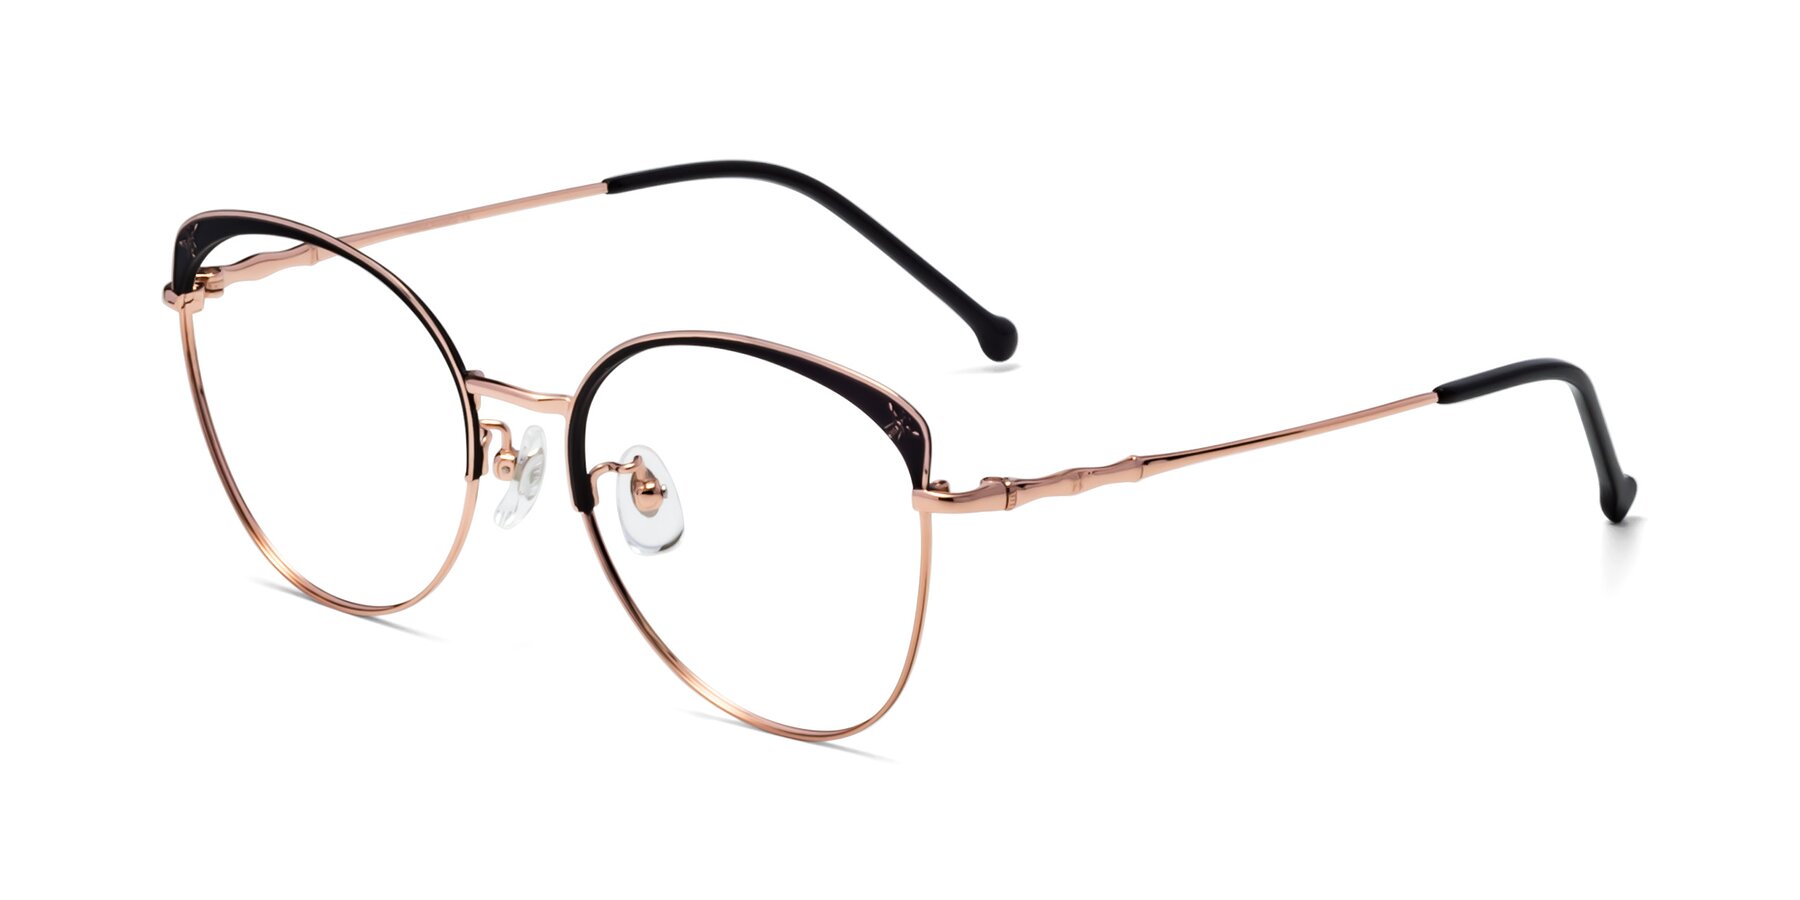 Angle of 18019 in Black-Rose Gold with Clear Eyeglass Lenses